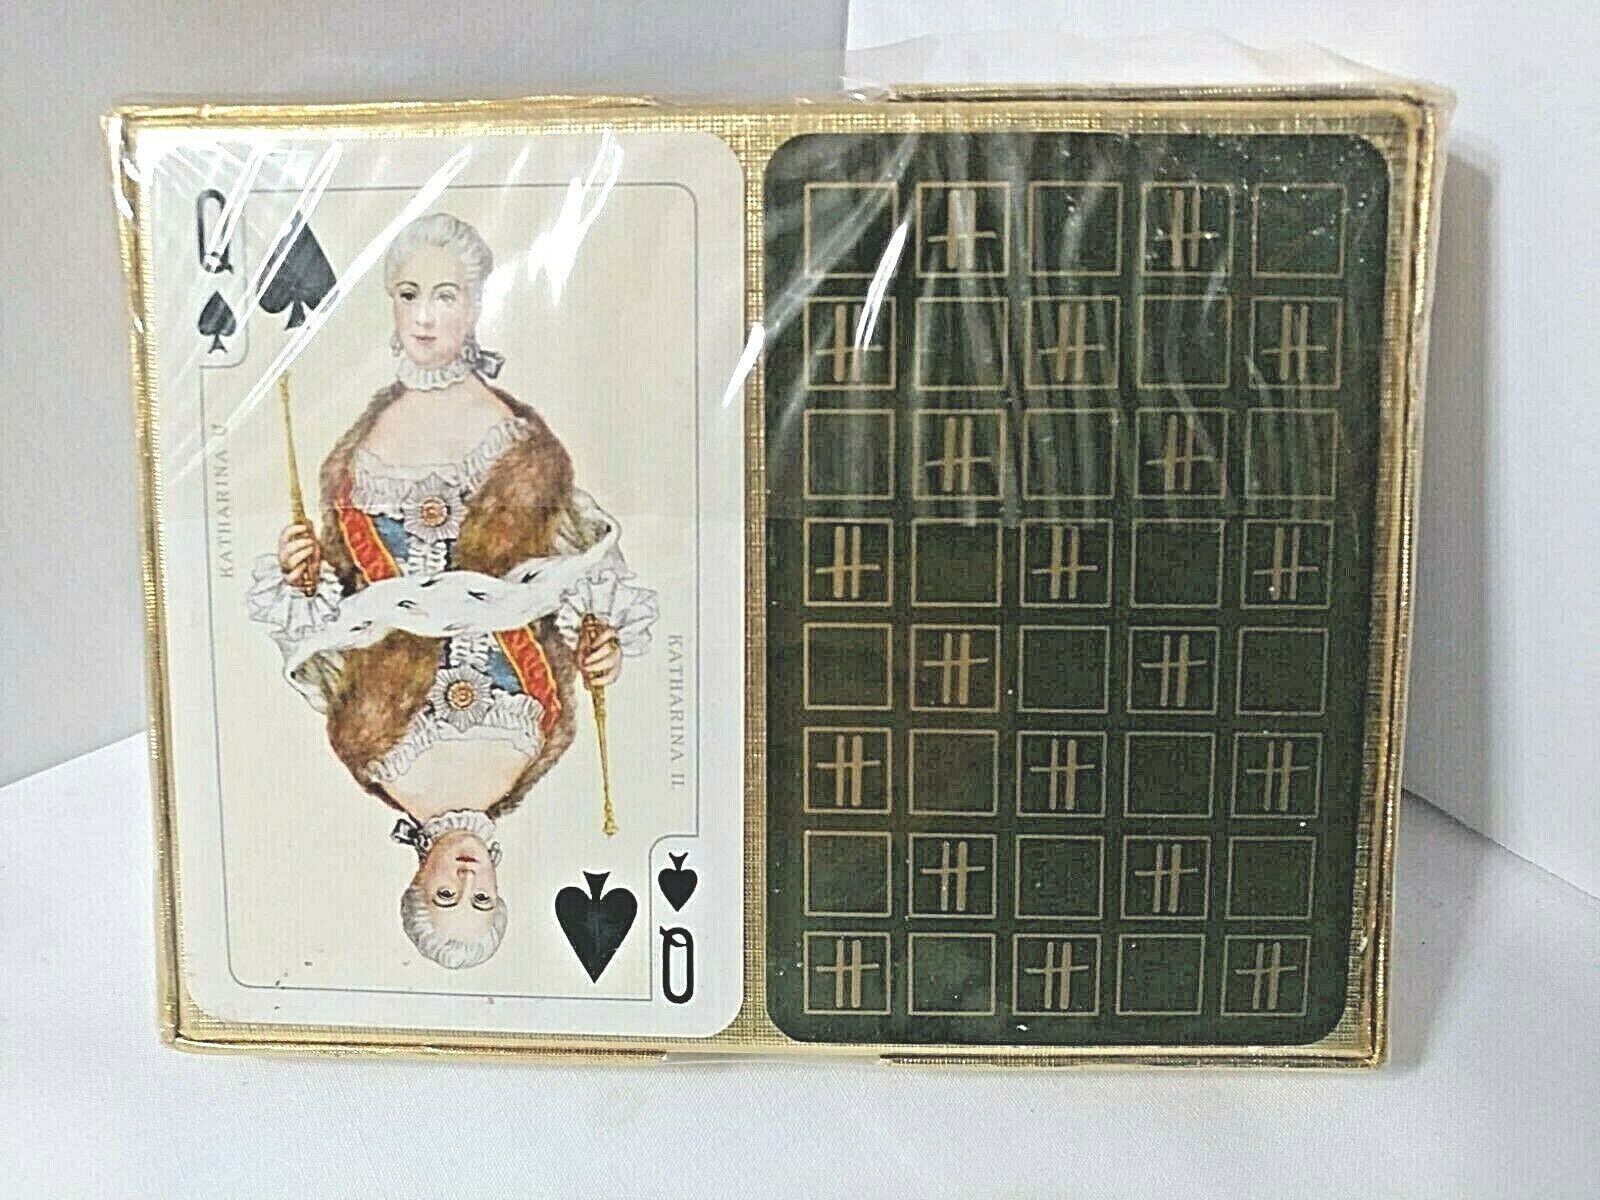 Primary image for New HARRODS Exclusive MADAME POMPADOUR Playing Cards Double Deck by Piatnik